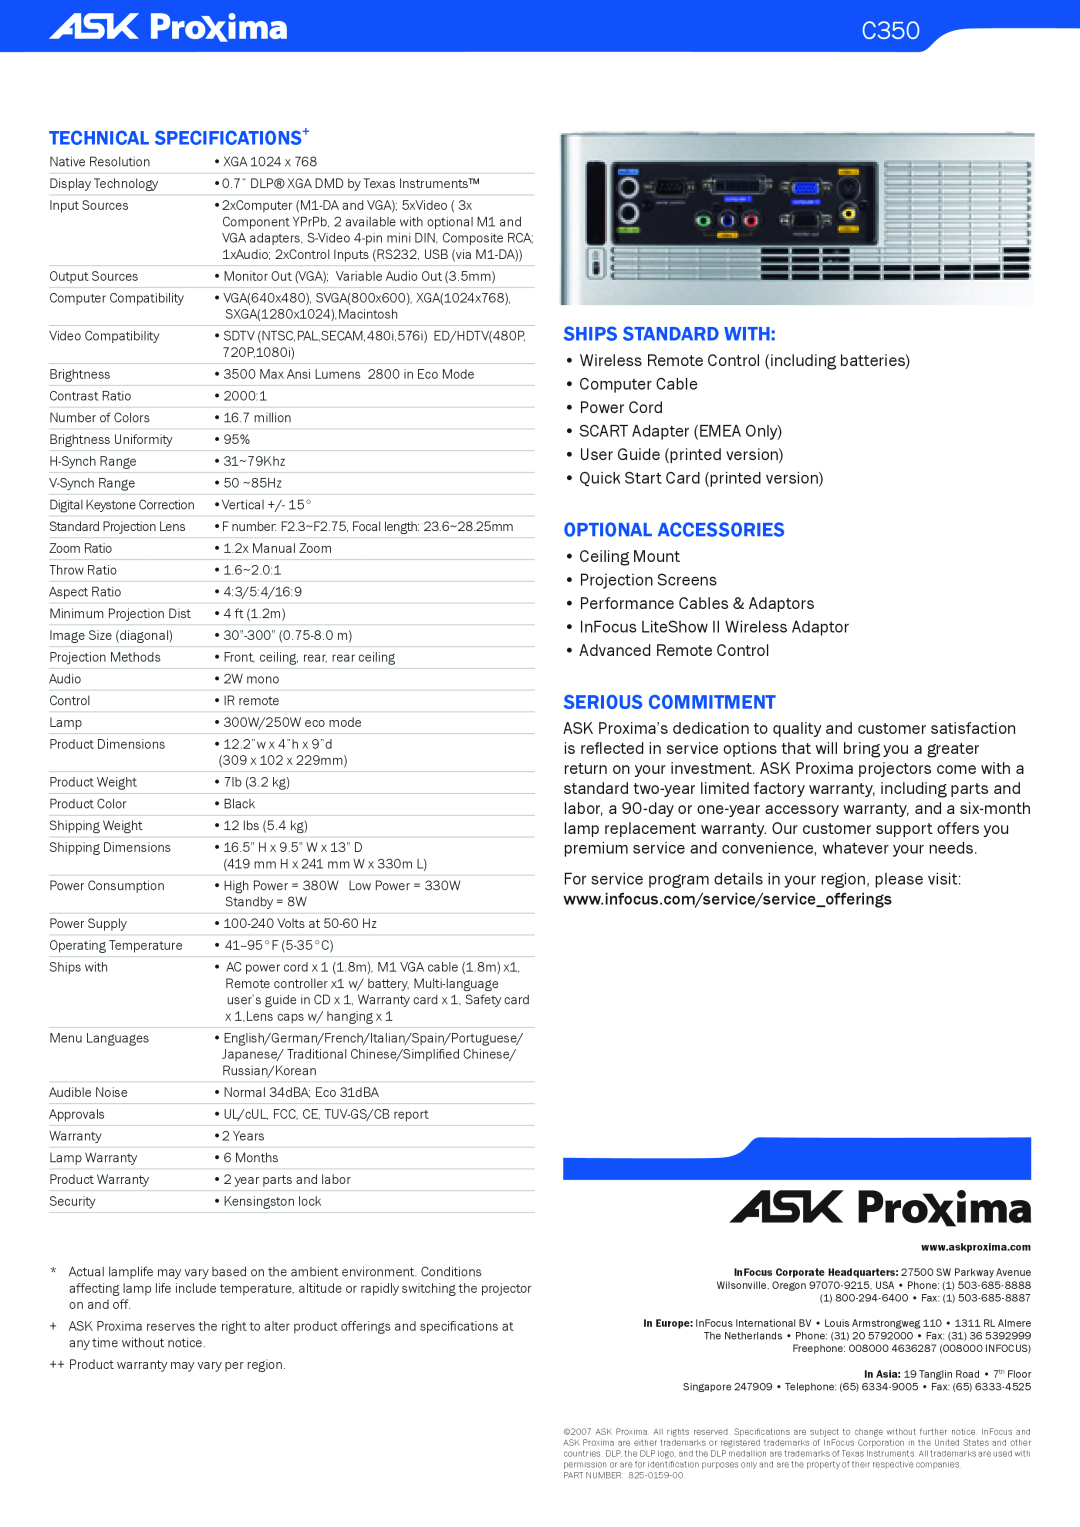 Ask Proxima C350 manual Technical Specifications+, Ships Standard With, Optional Accessories, Serious Commitment 